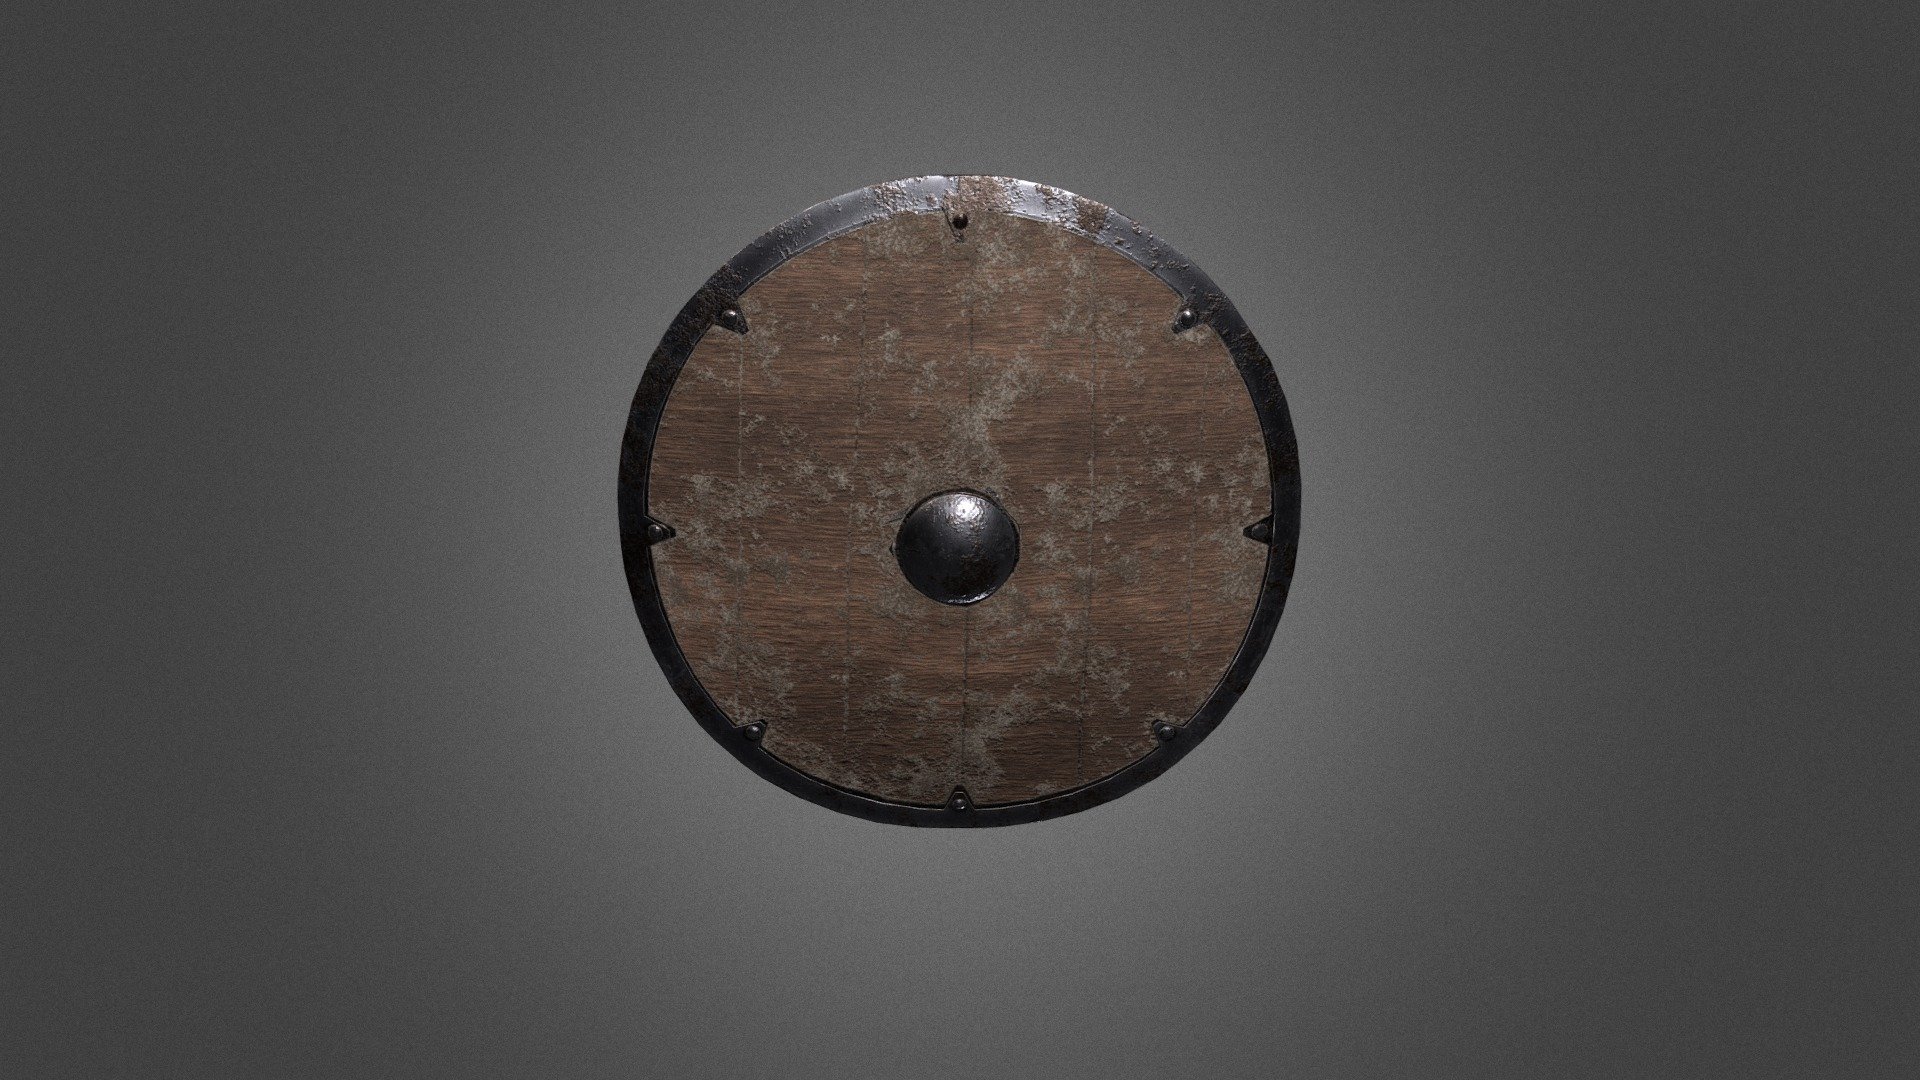 Medival age shield made for my diorama project. made in 3ds max and baked in substance painter. any feedback or comment is highly appreciated 3d model